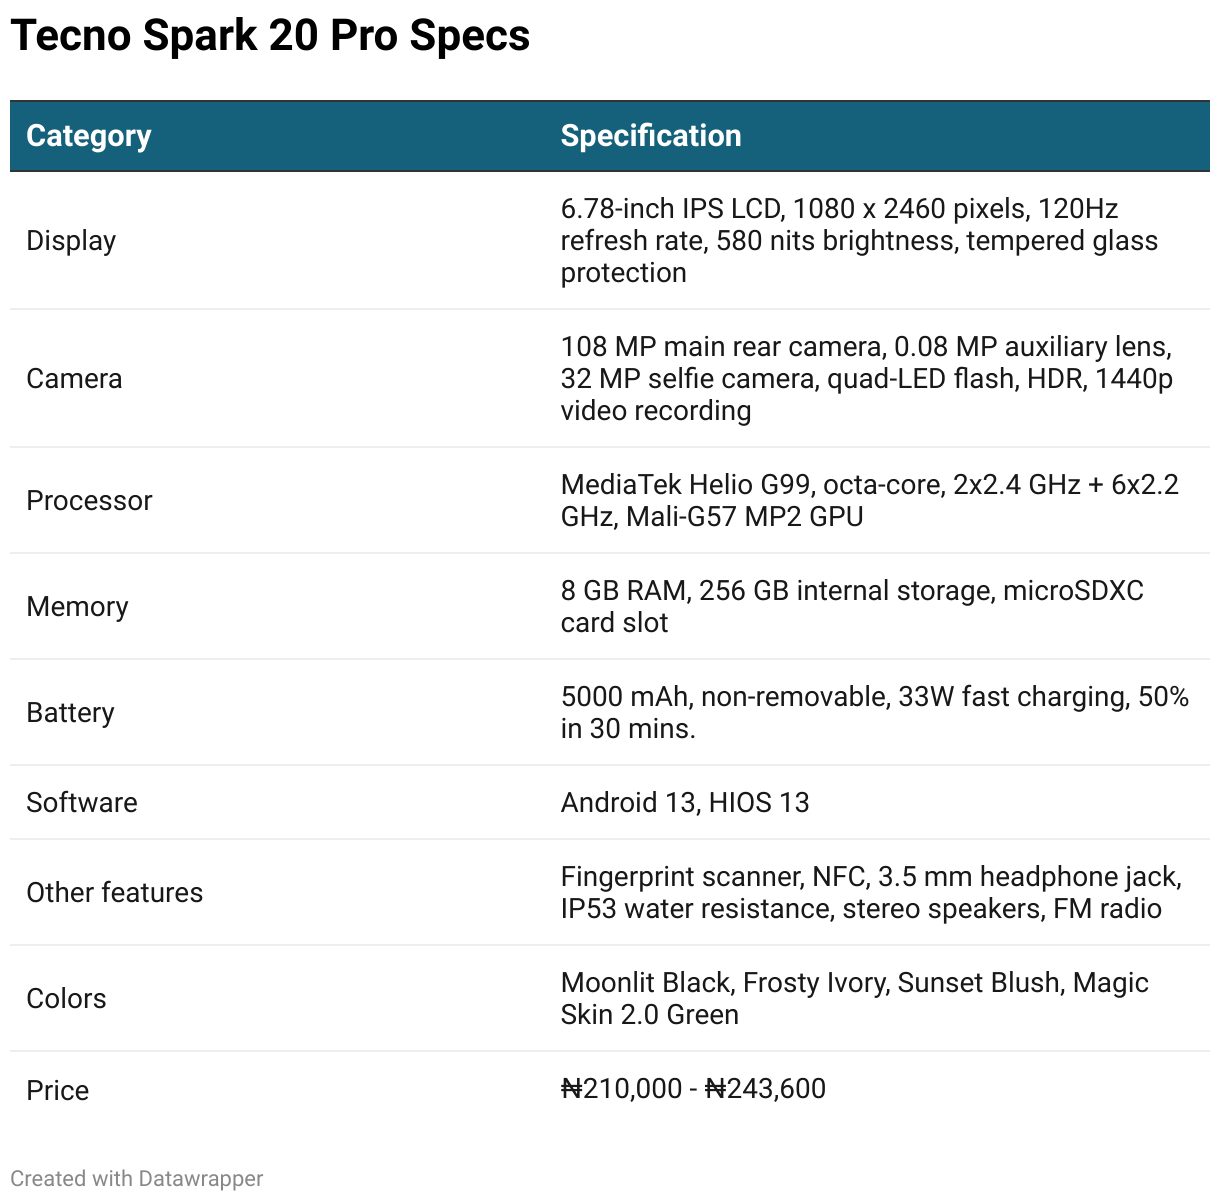 Full specification table for the Tecno Spark 20 Pro.